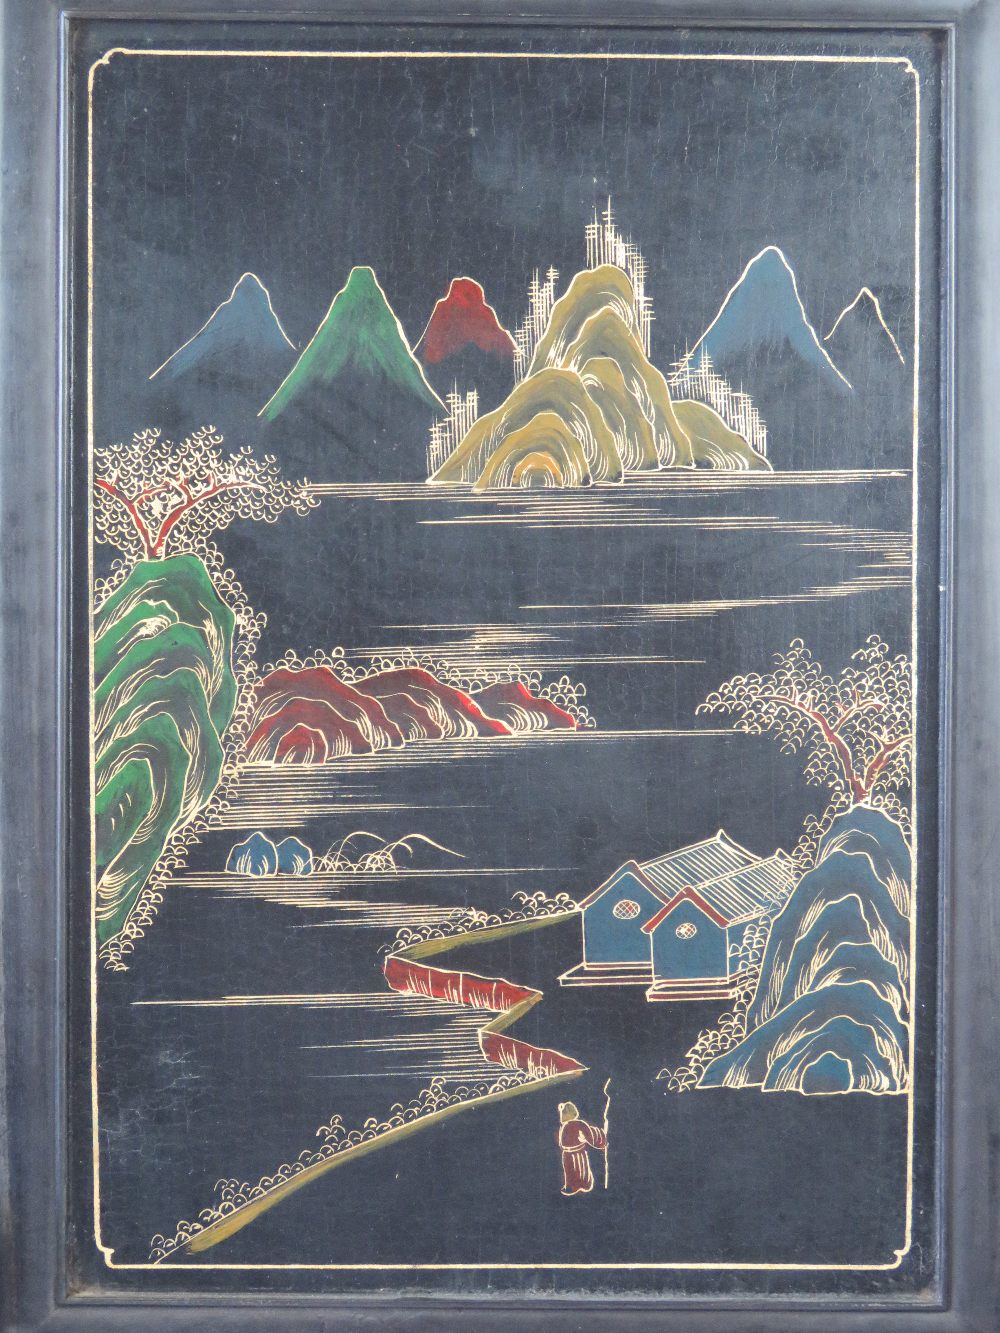 A superb quality 19th century Chinese ha - Image 6 of 6